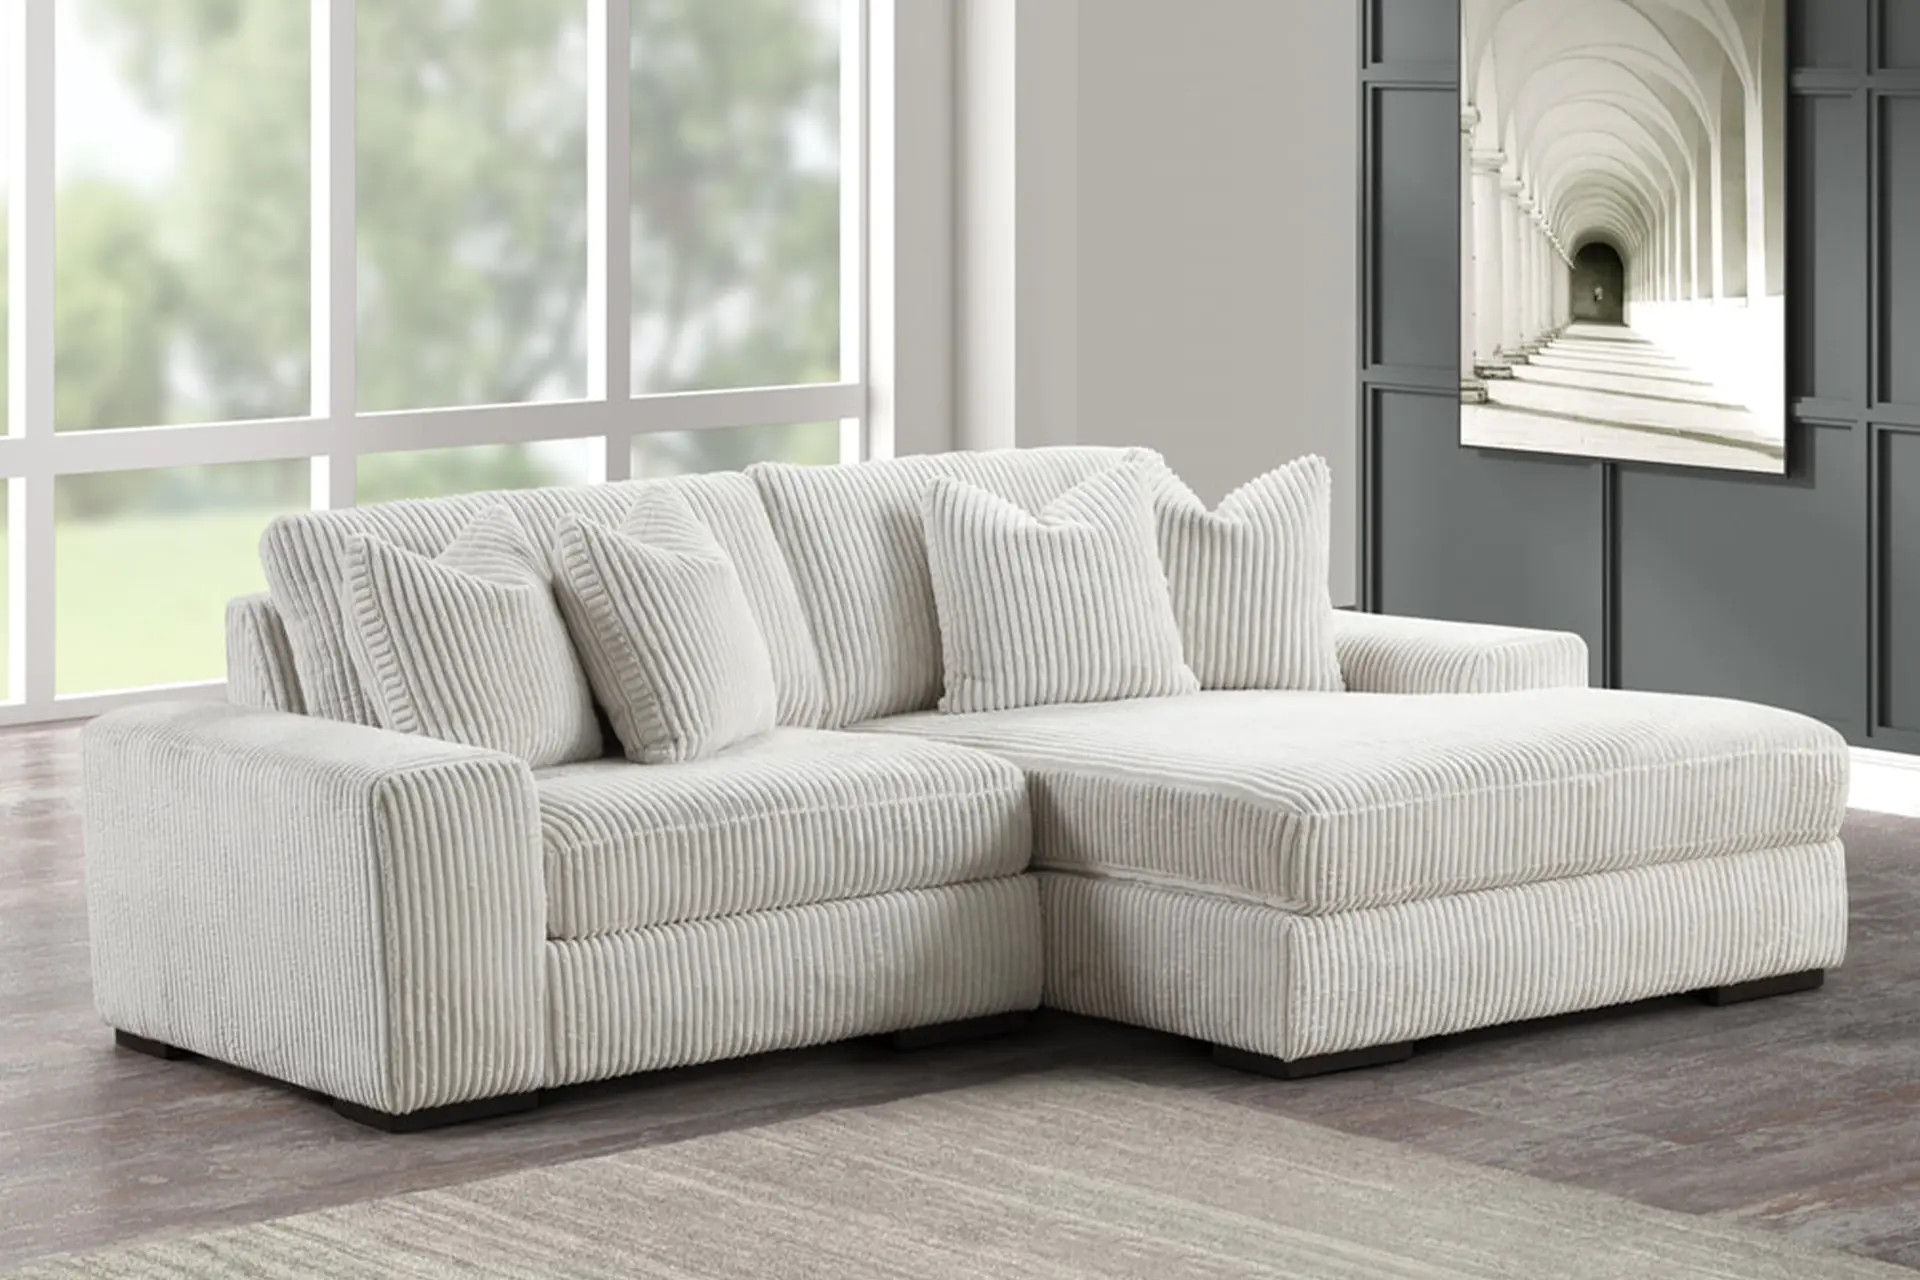 Sunday Beige 2 Piece Sectional.